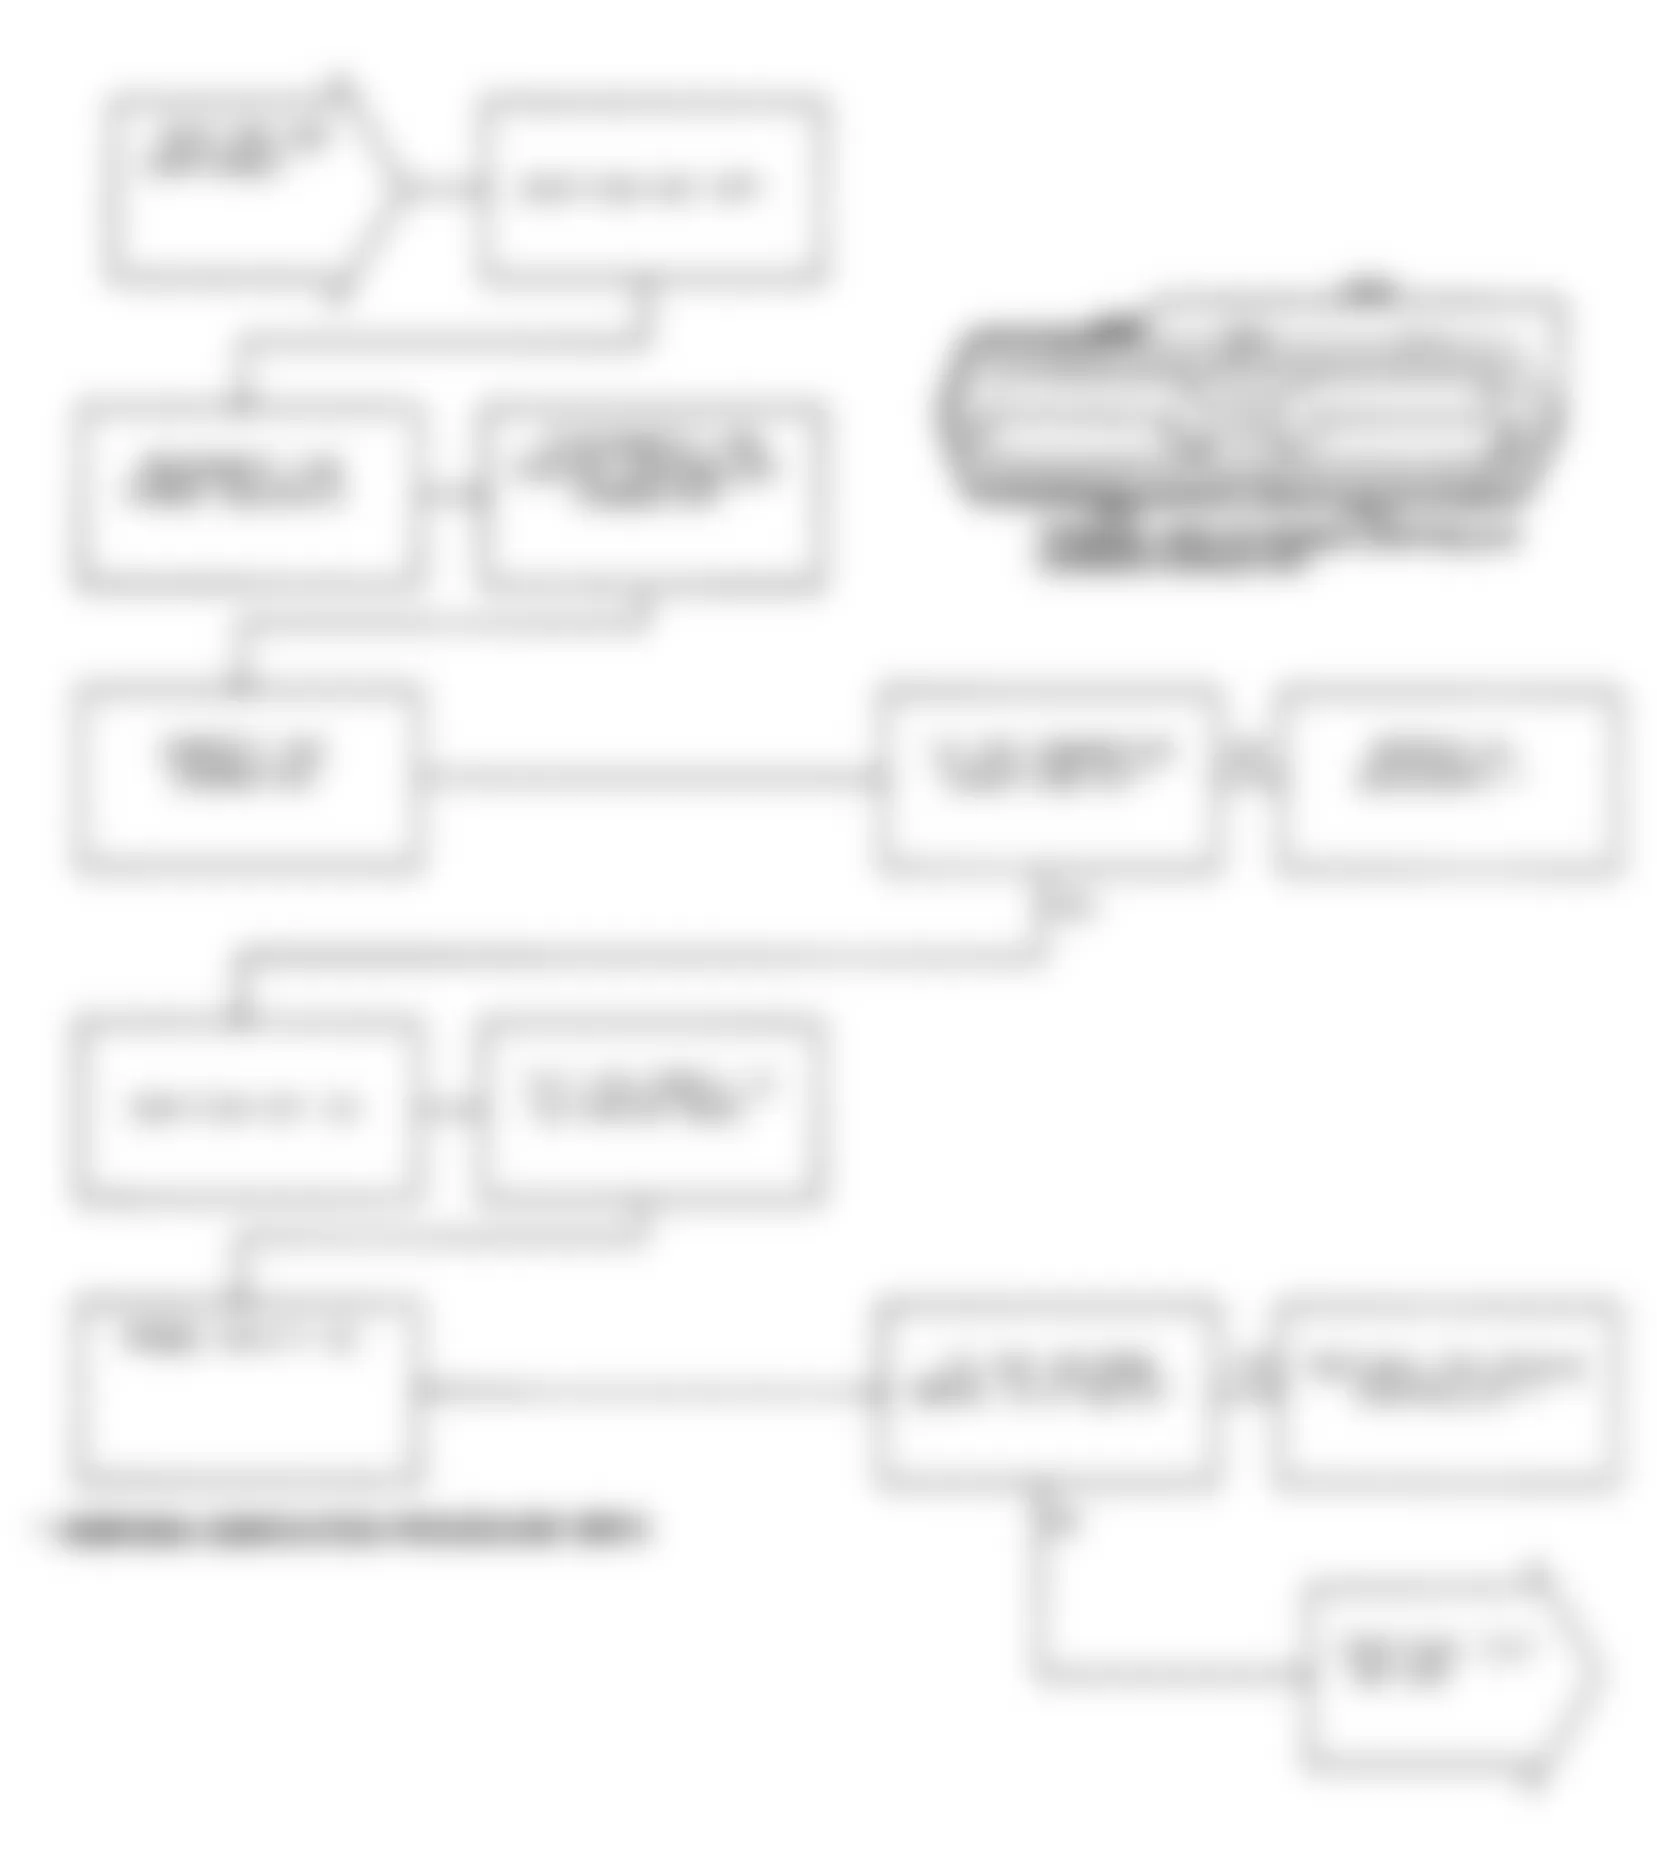 Dodge Daytona Shelby 1991 - Component Locations -  Test DR-18A Code 31, Diagnostic Flow Chart (2 of 3)